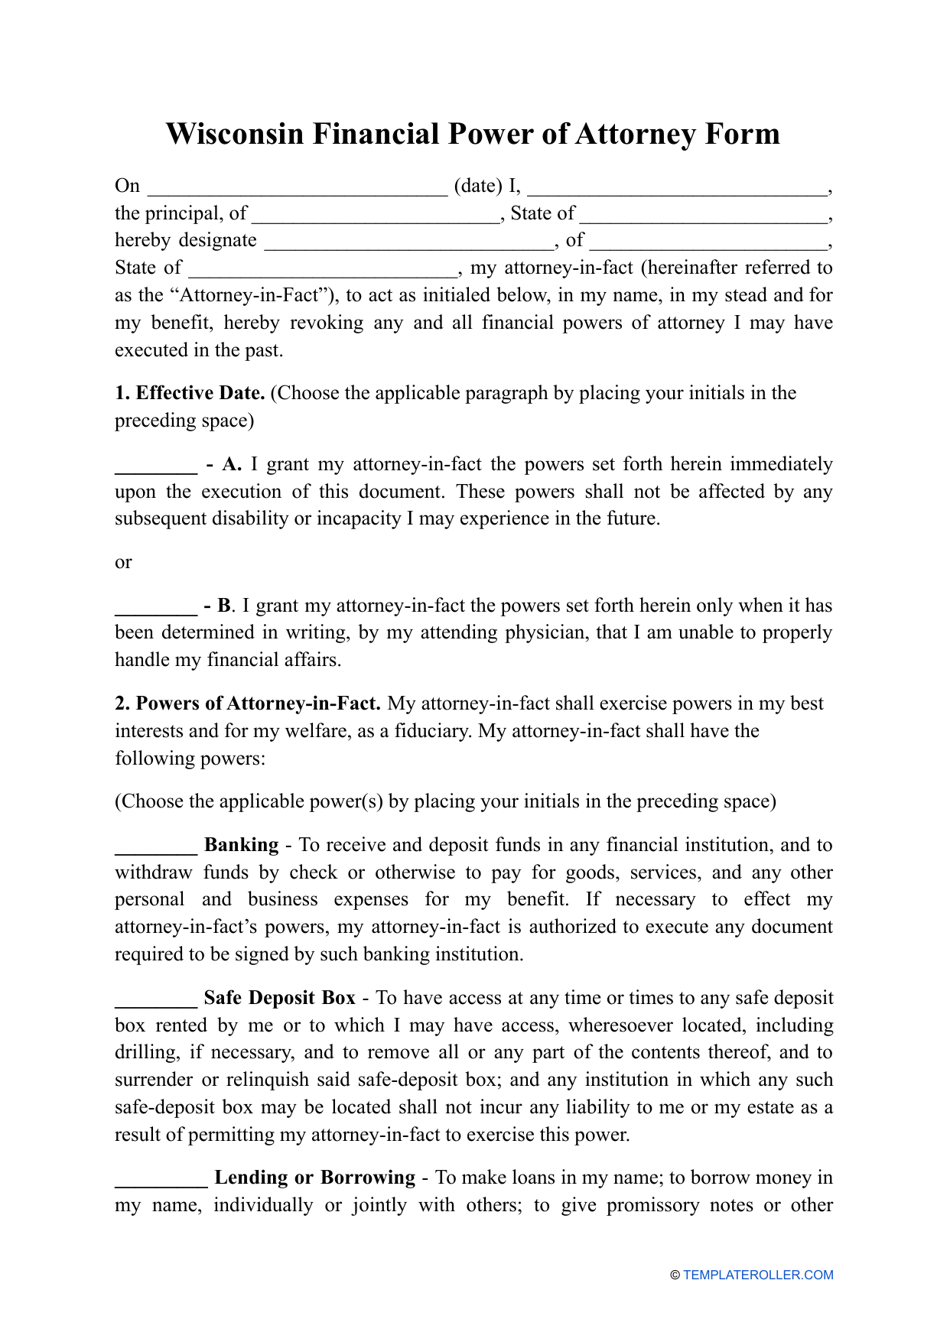 Financial Power of Attorney Form - Wisconsin, Page 1